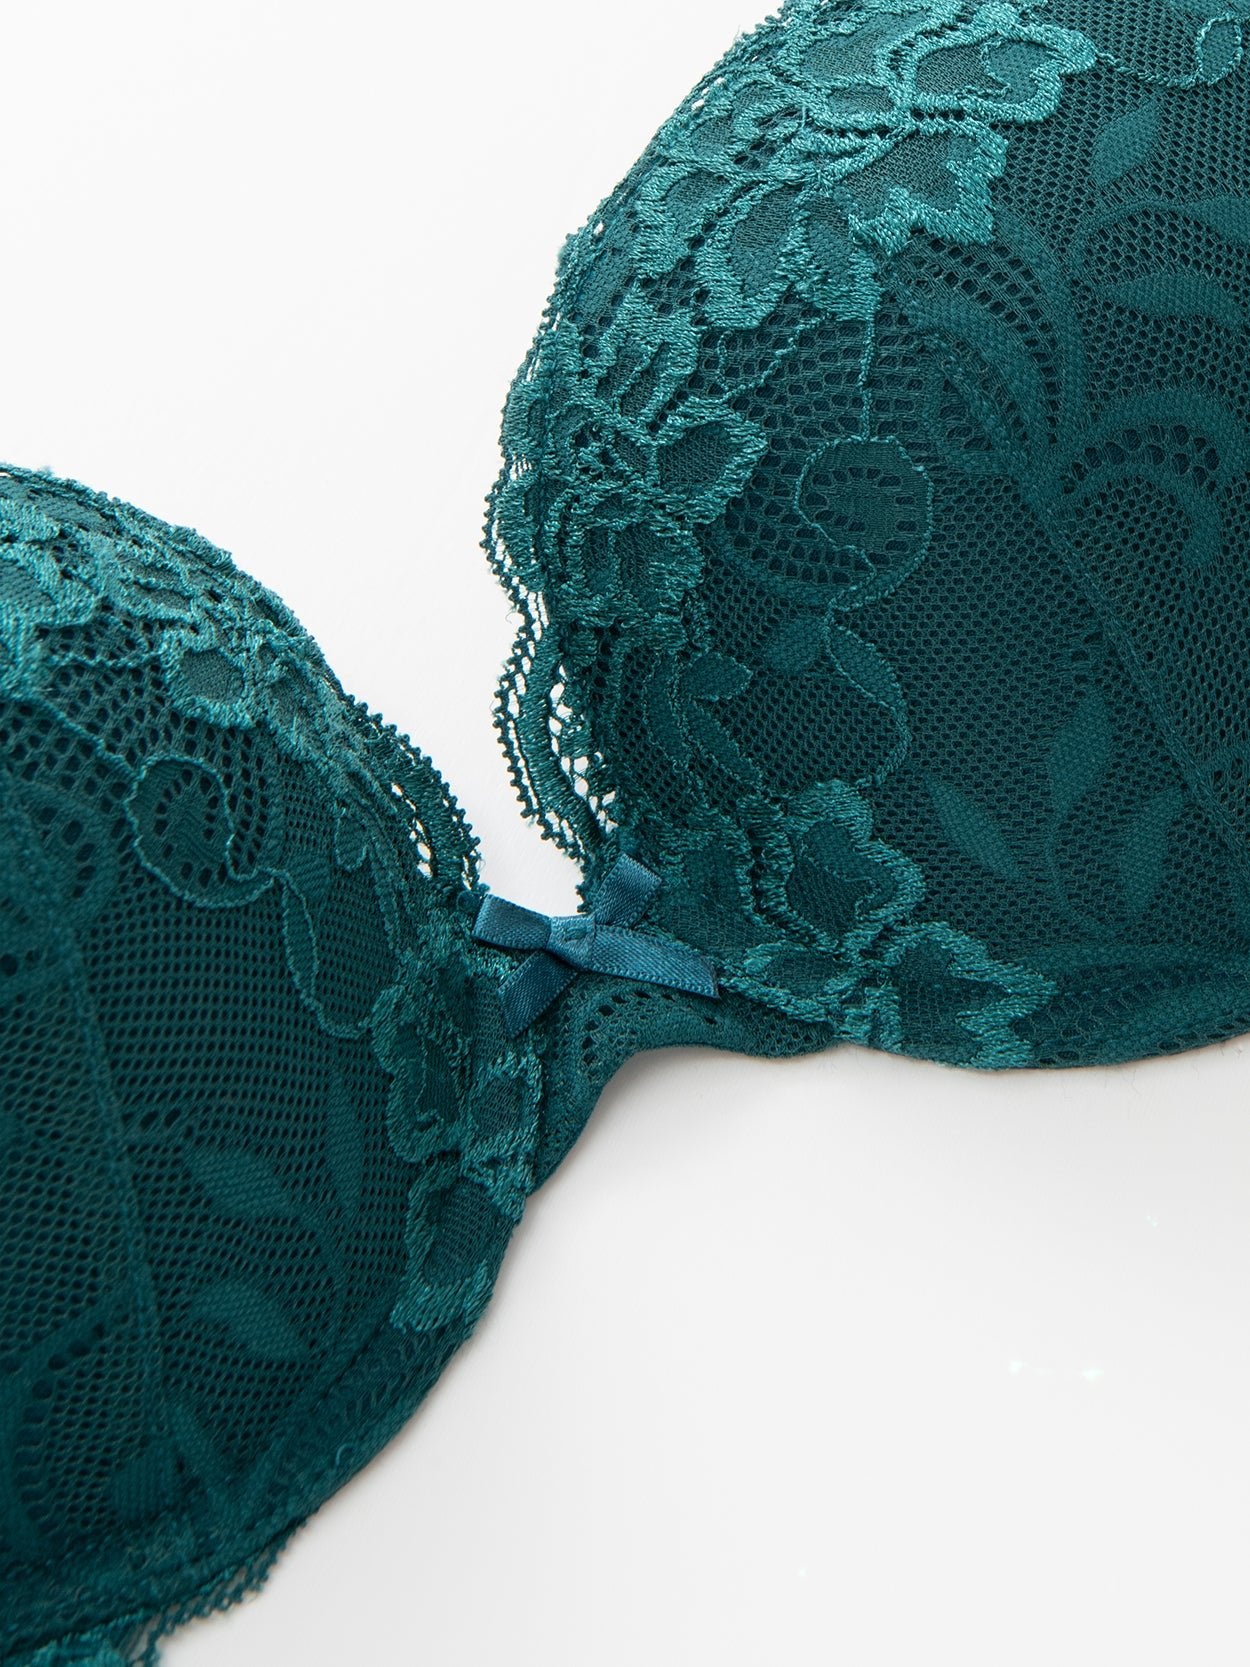 Teal Lace Underwired Bra | New Look